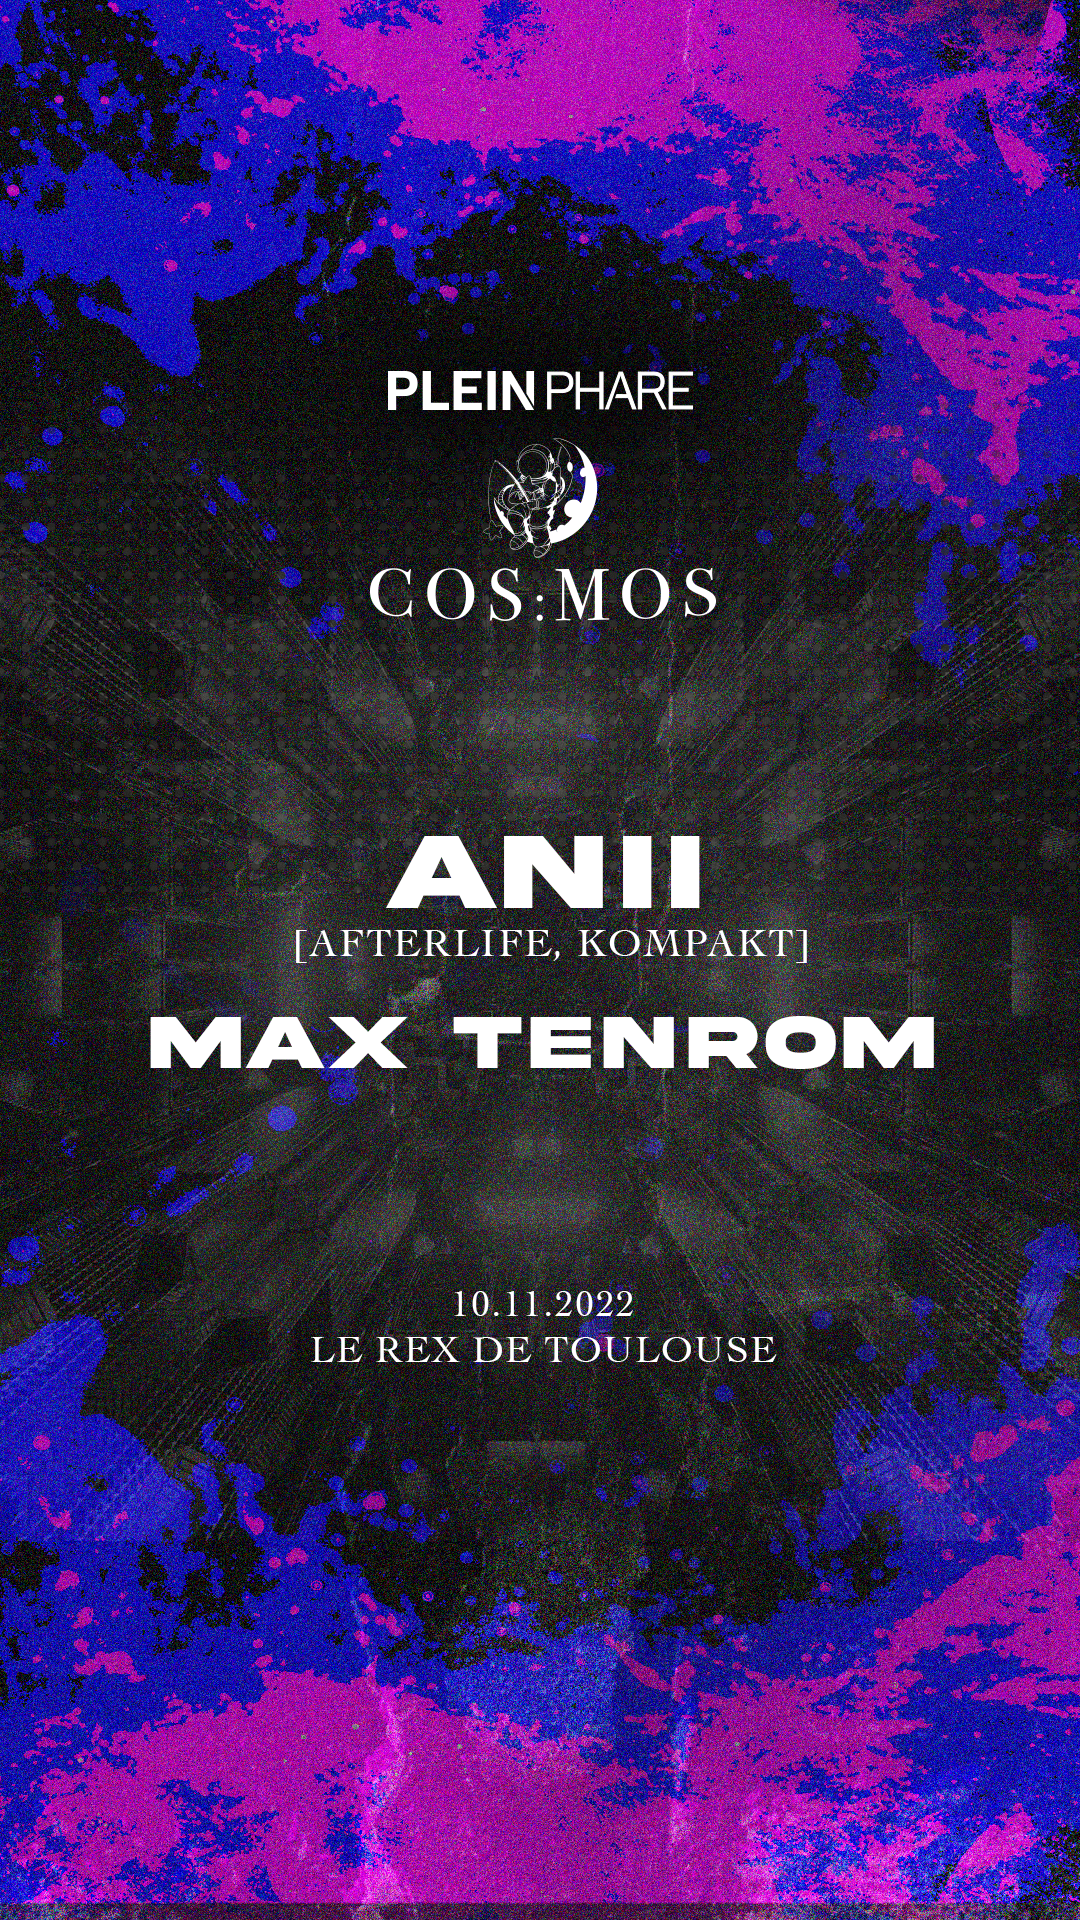 Plein Phare - COS:MOS with ANII, Max TenRoM - Melodic Techno - フライヤー表